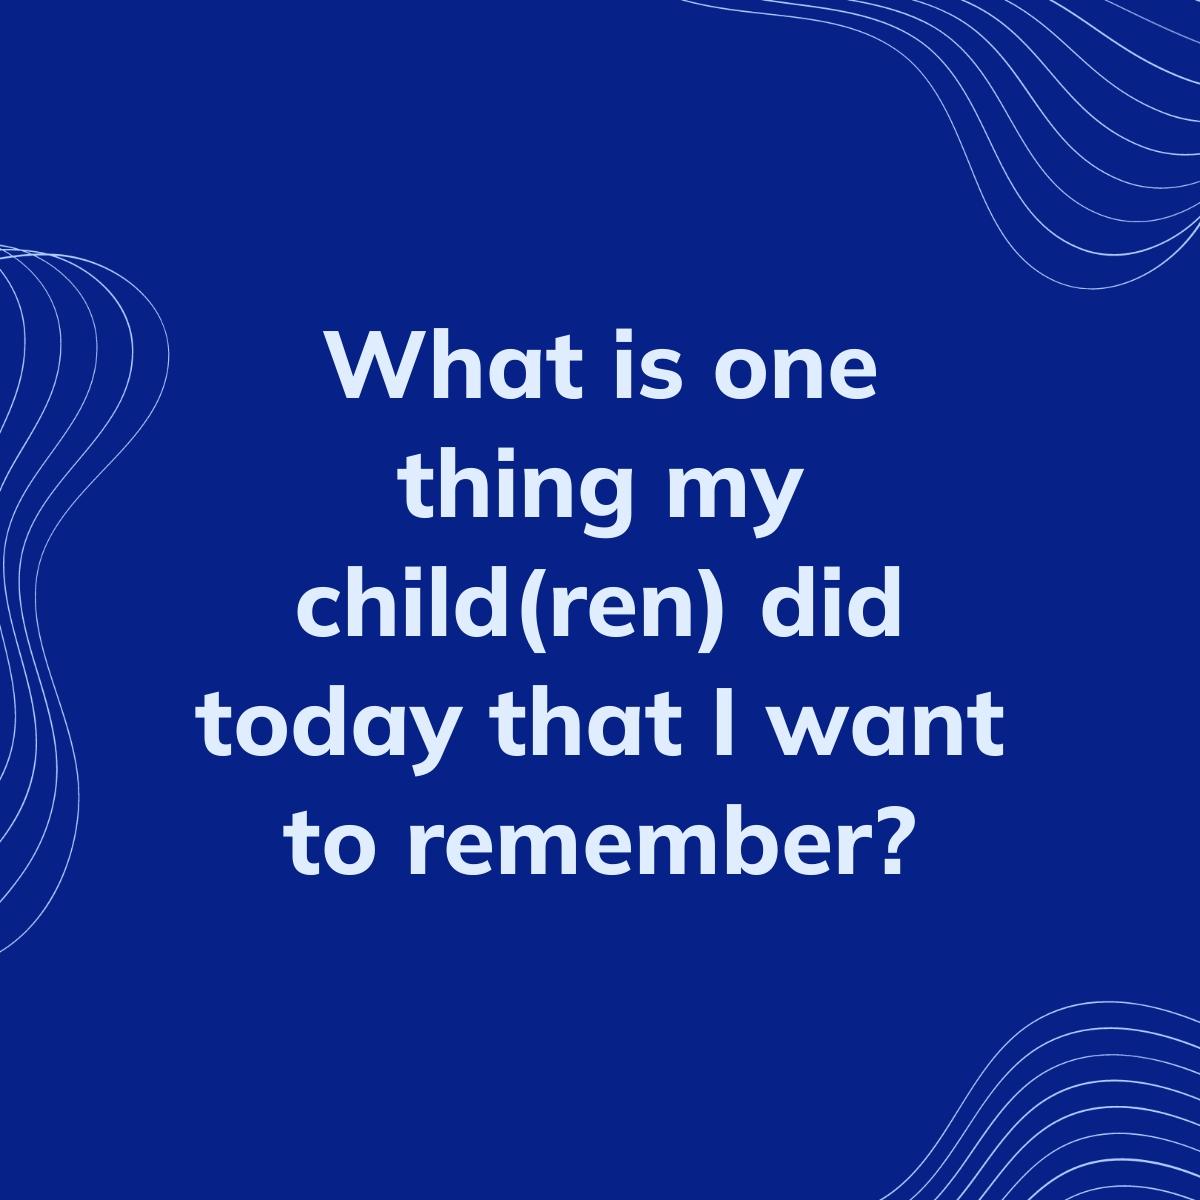 Journal Prompt: What is one thing my child(ren) did today that I want to remember?